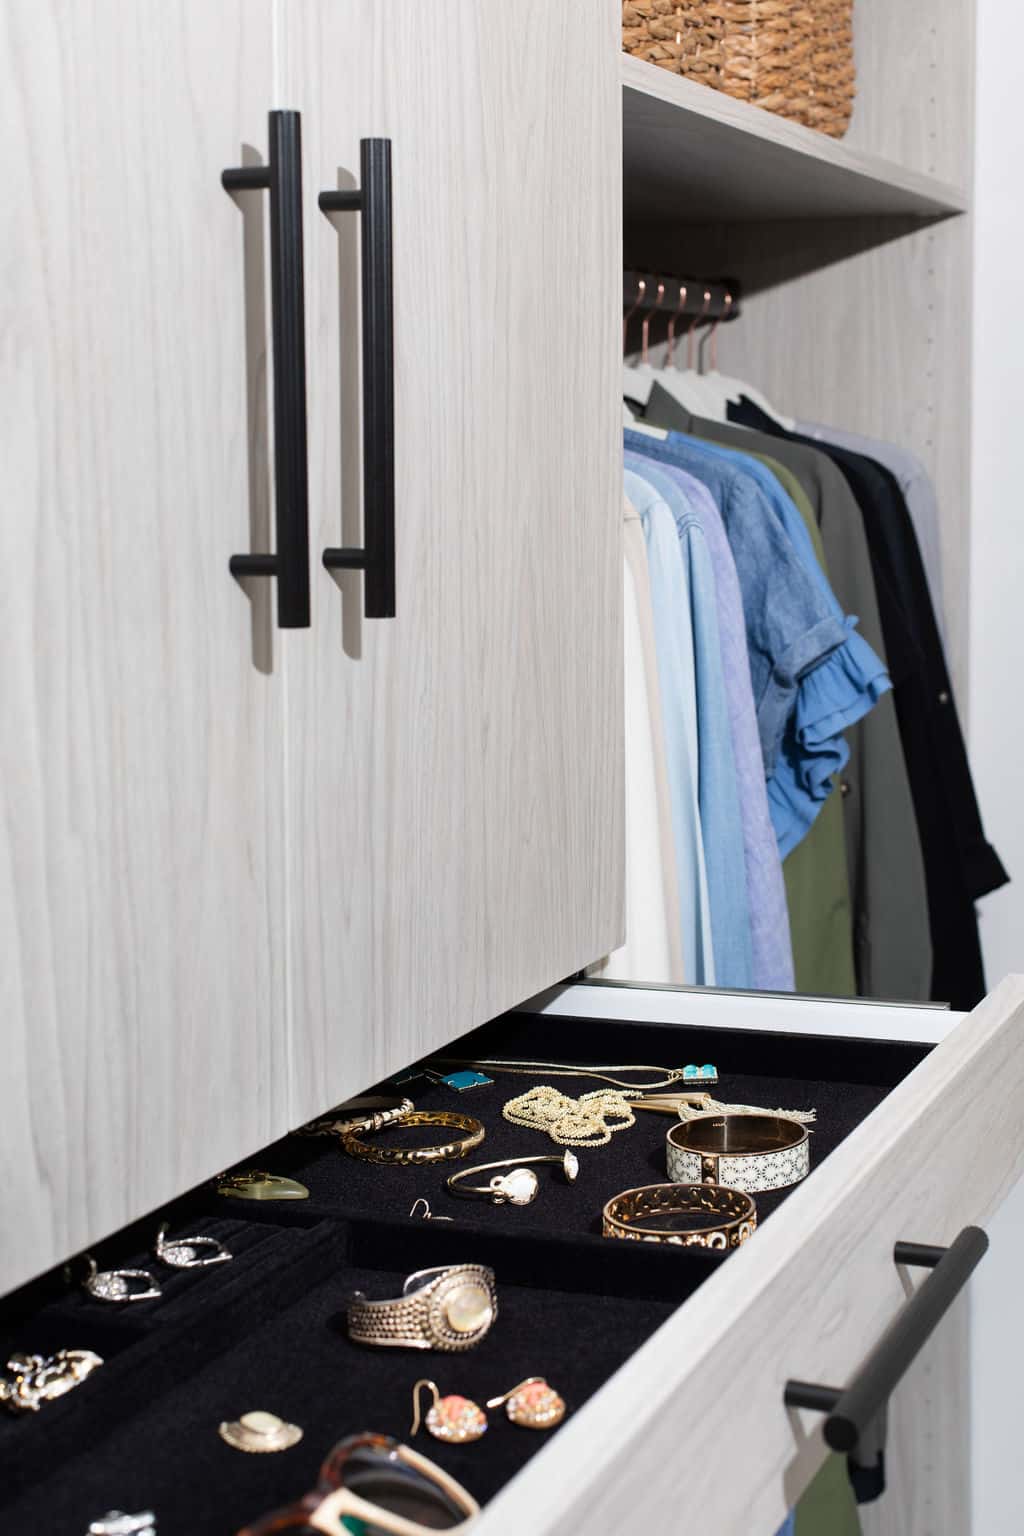 Our custom closet home systems are fully adjustable and include accessories and lighting to enhance the look and function of your space. Contact a More Space Place designer to transform your closet today.